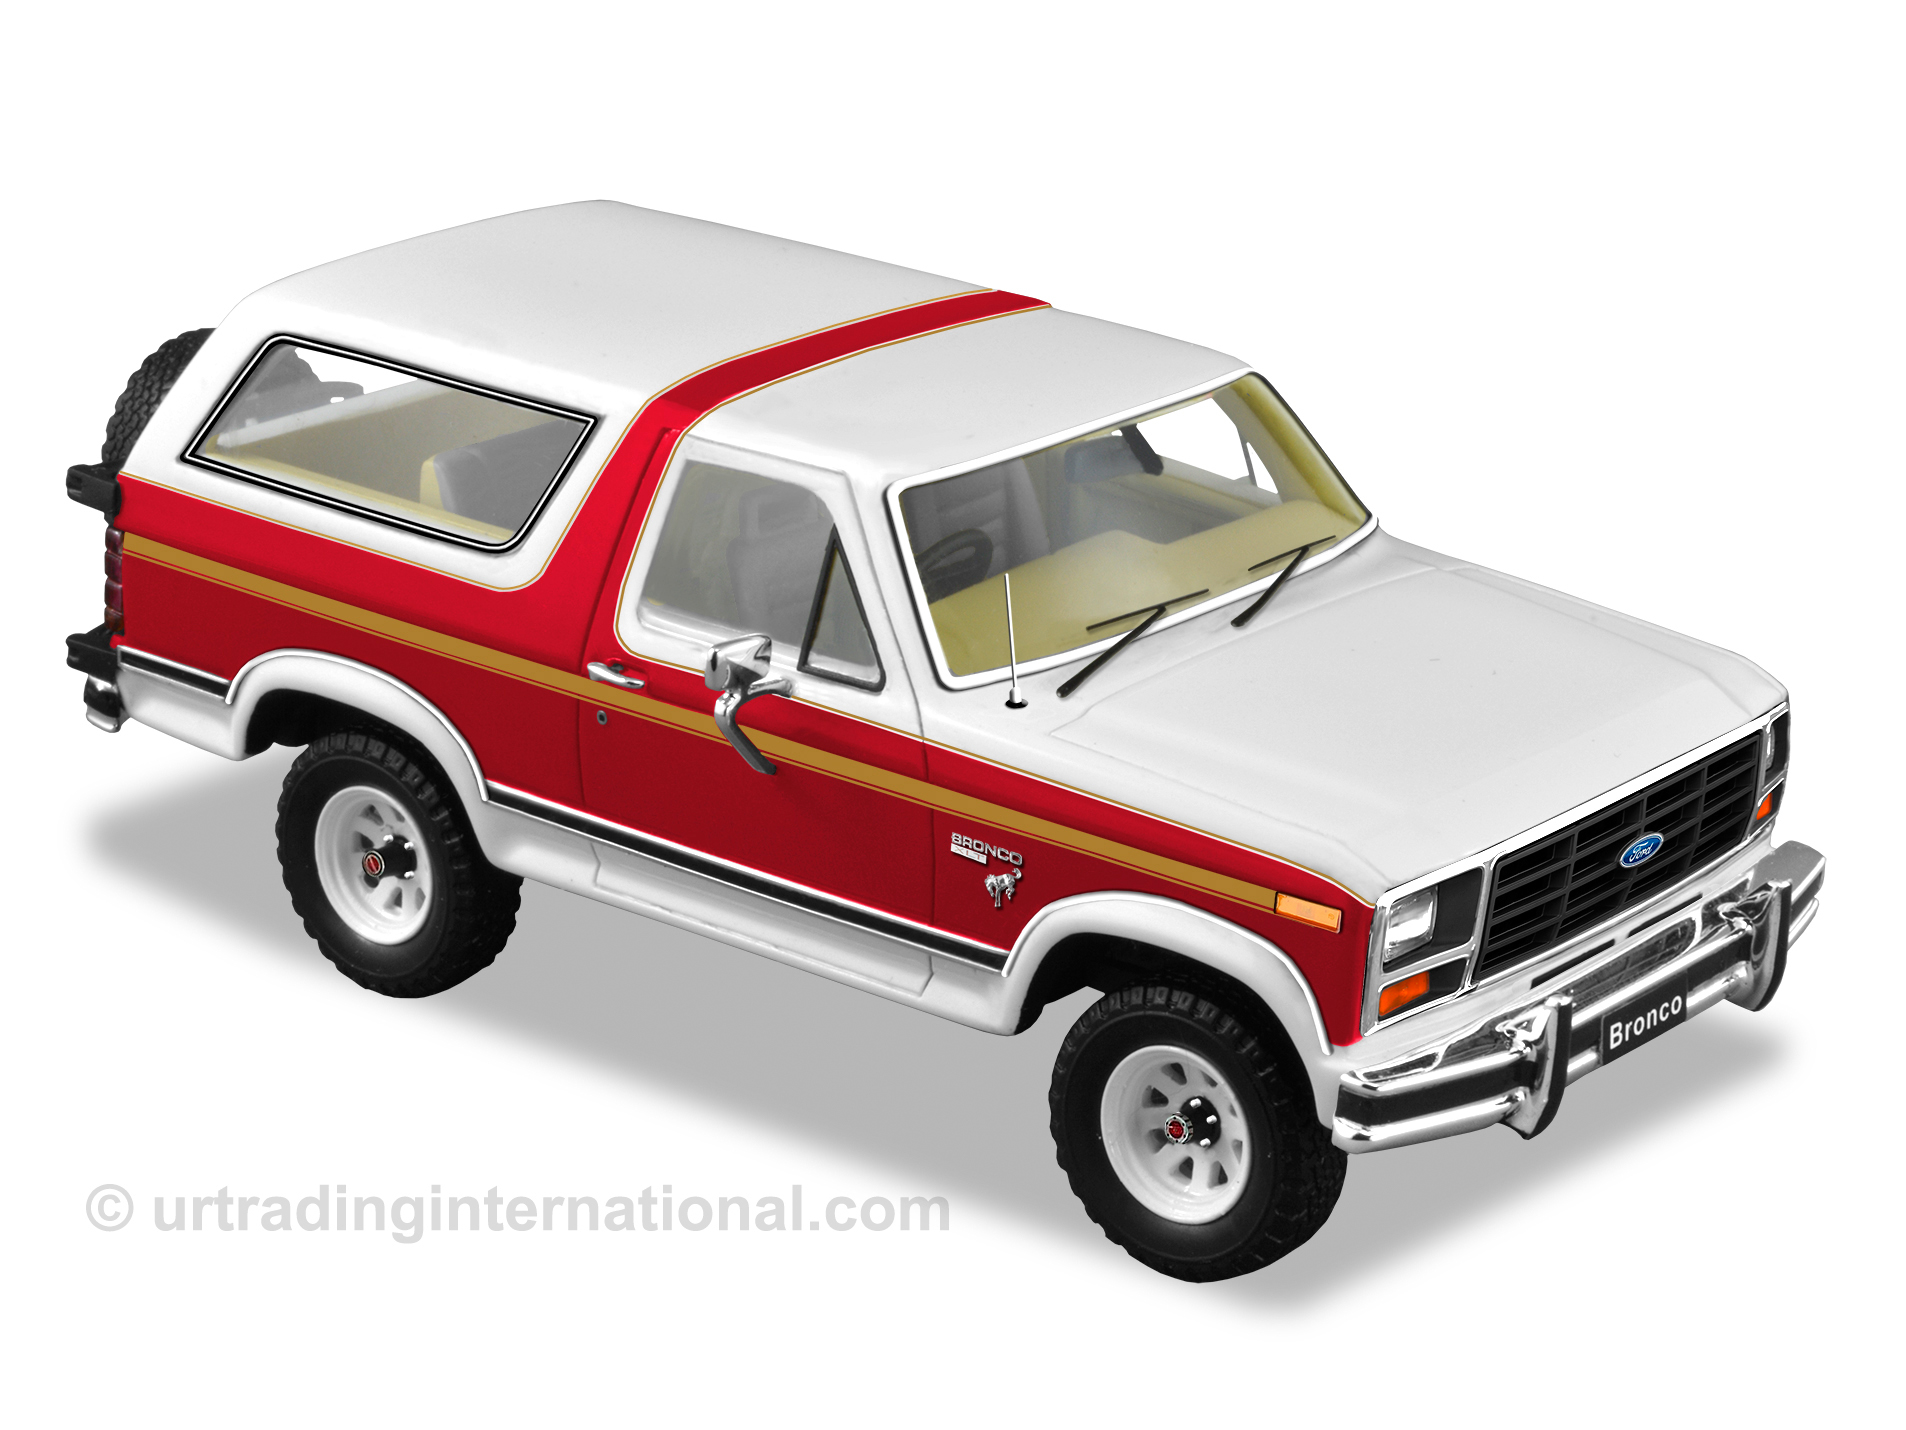 1985 Ford Bronco XLT – Monza Red